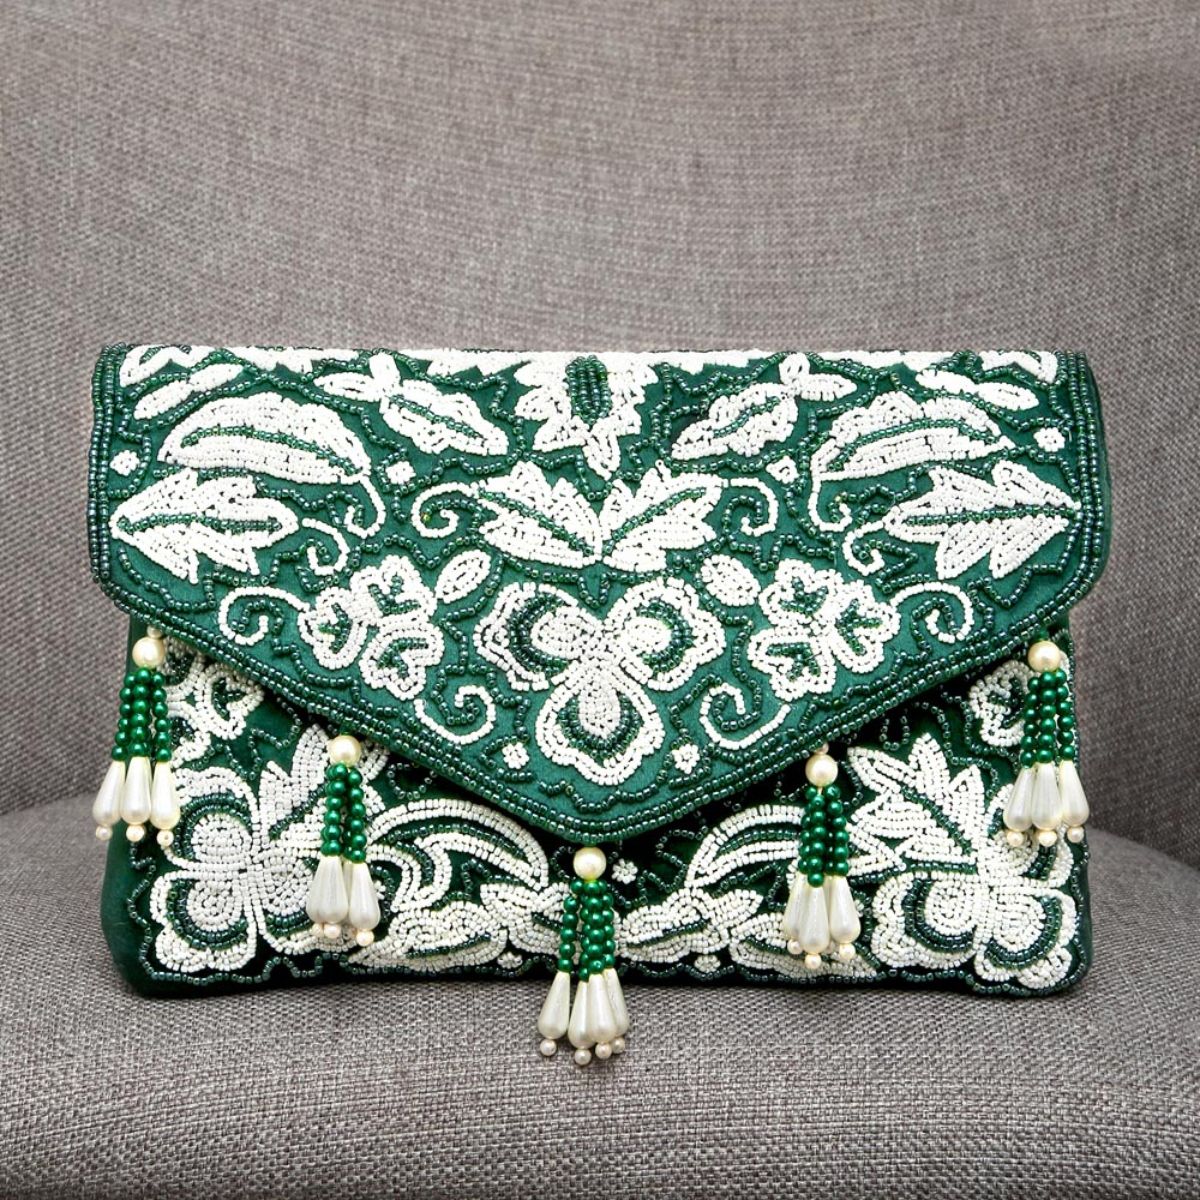 Mulian LilY Green Velvet Evening Bags For Women With Closure Rhinestone  Crystal Embellished Clutch Purse For Party Wedding M453 - Yahoo Shopping